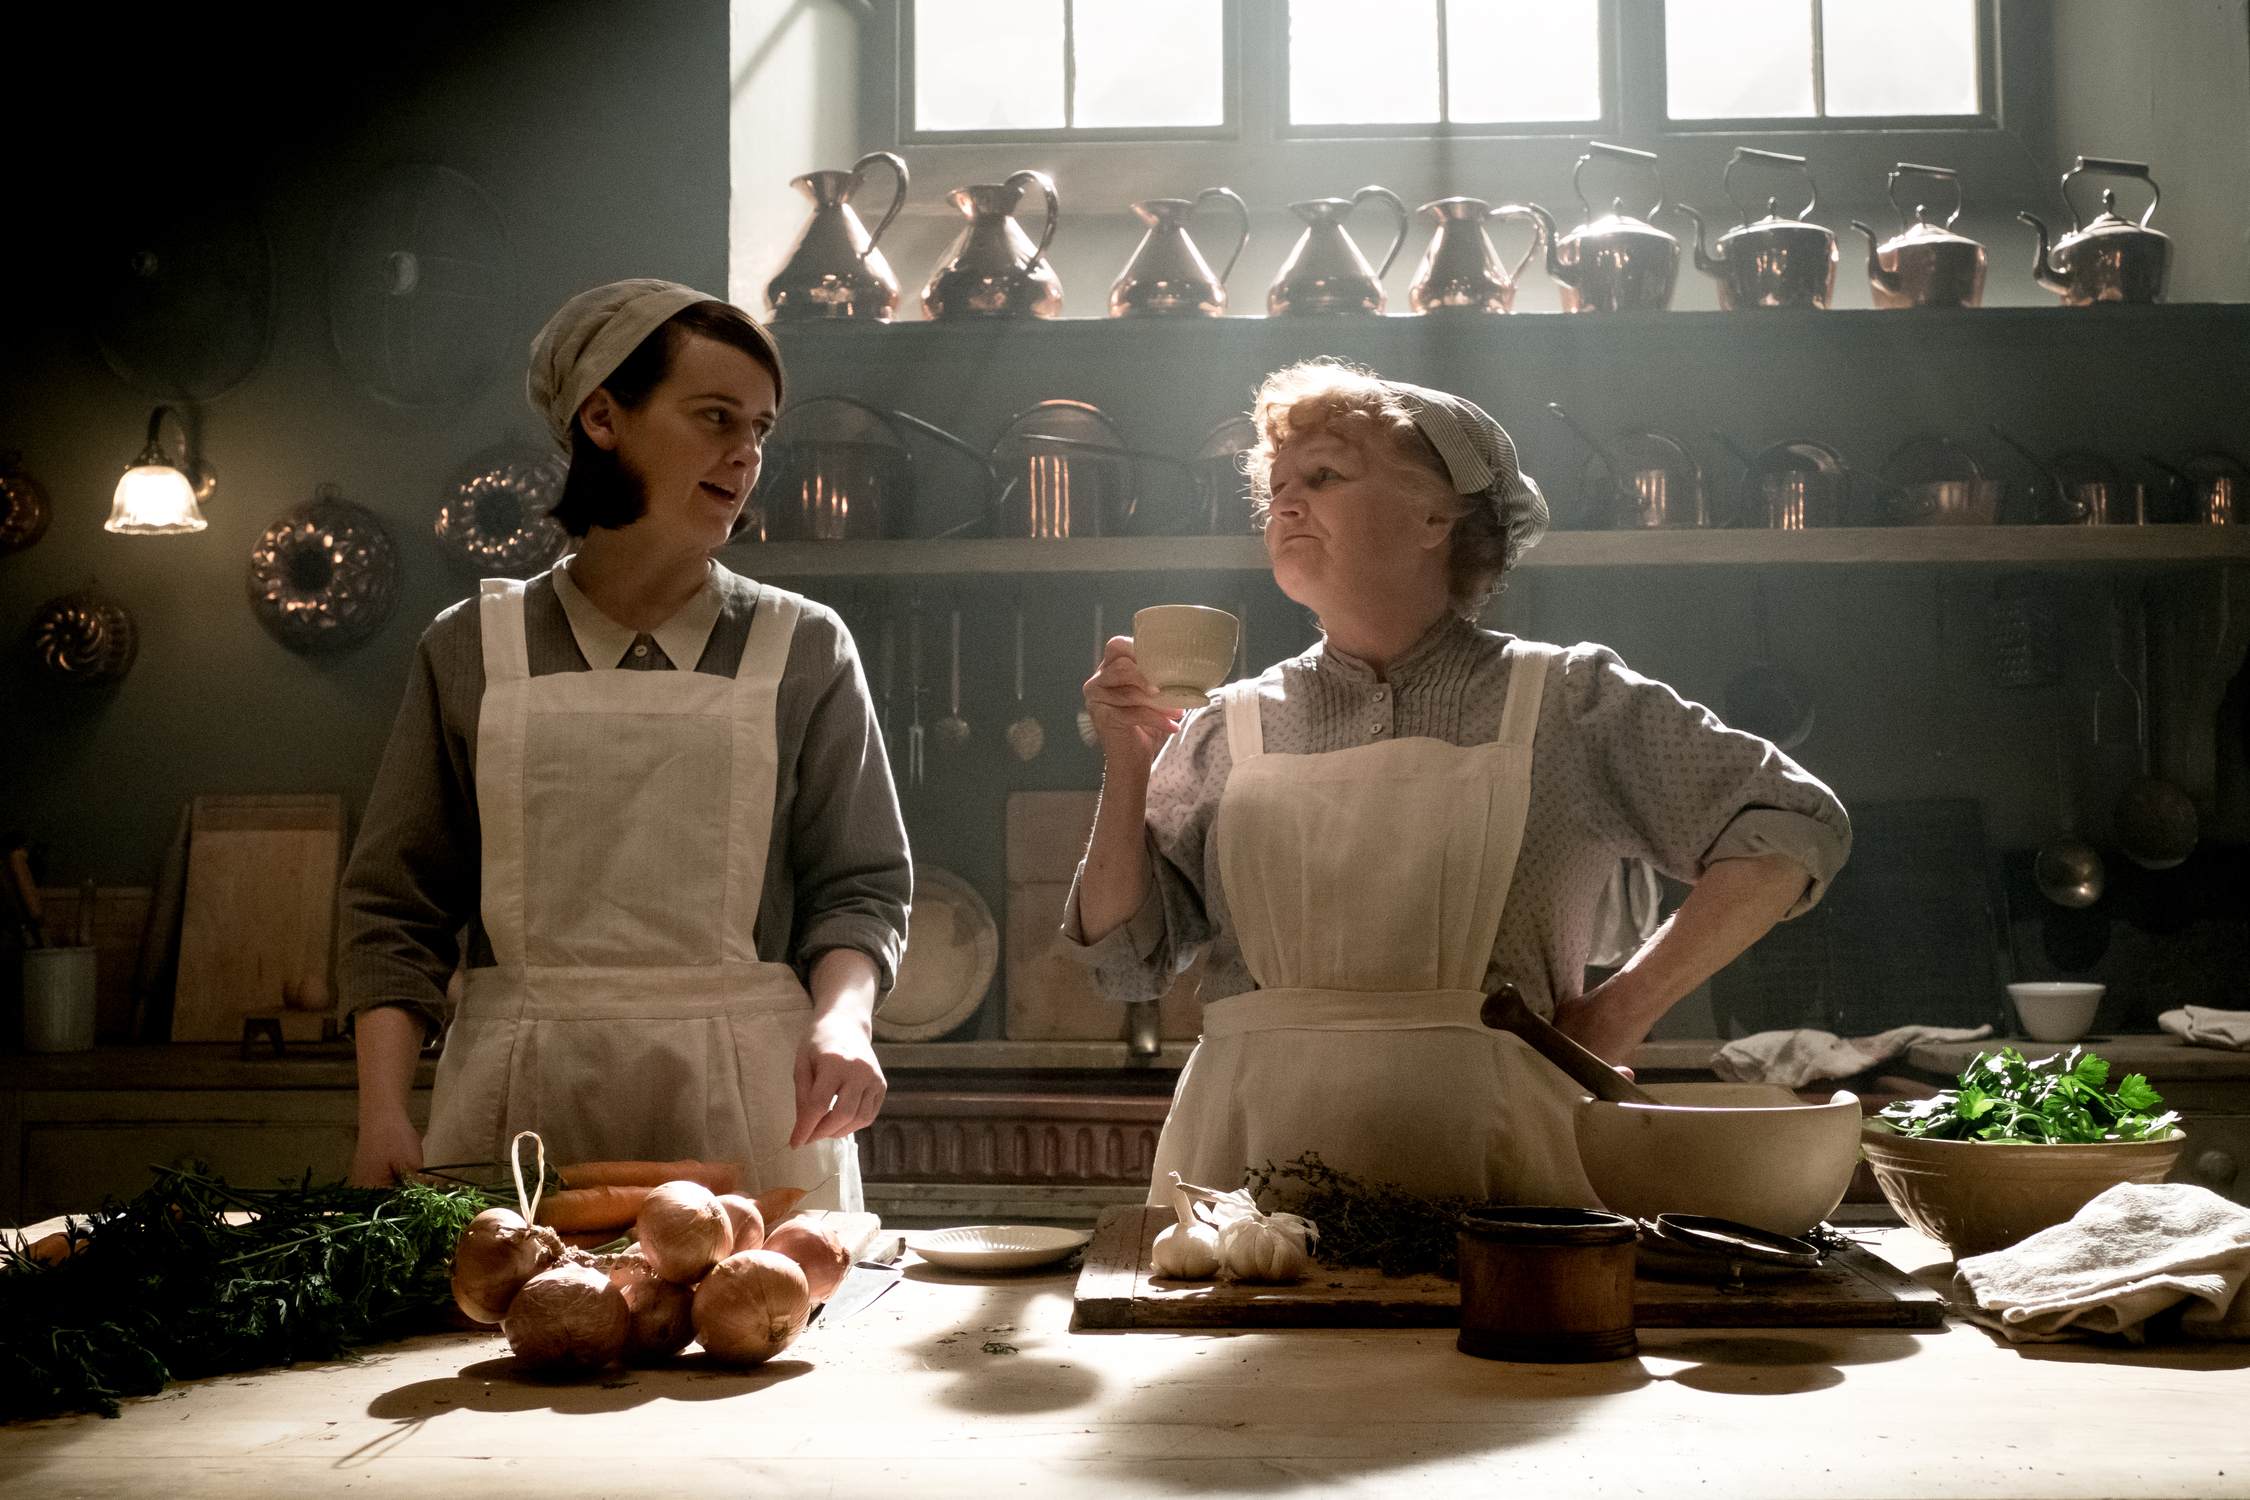 <p>Downton Abbey's cook, Mrs. Patmore (Lesley Nicol, right), is seen here in uniform alongside kitchen maid-turned-assistant cook Daisy Mason (played by Sophie McShera) on a poster for the "Downton Abbey" film. "Leslie, Mrs. Patmore, has had the same cap for six years," costume designer Anna Mary Scott Robbins told <a href="https://fashionista.com/2019/09/downton-abbey-movie-costumes">Fashionista</a>. "I offered to make her a new one [for the movie] and she said, 'No, no, this is my cap. I need my cap.' So there are certain things that are favorites and that's the way it should be."</p>